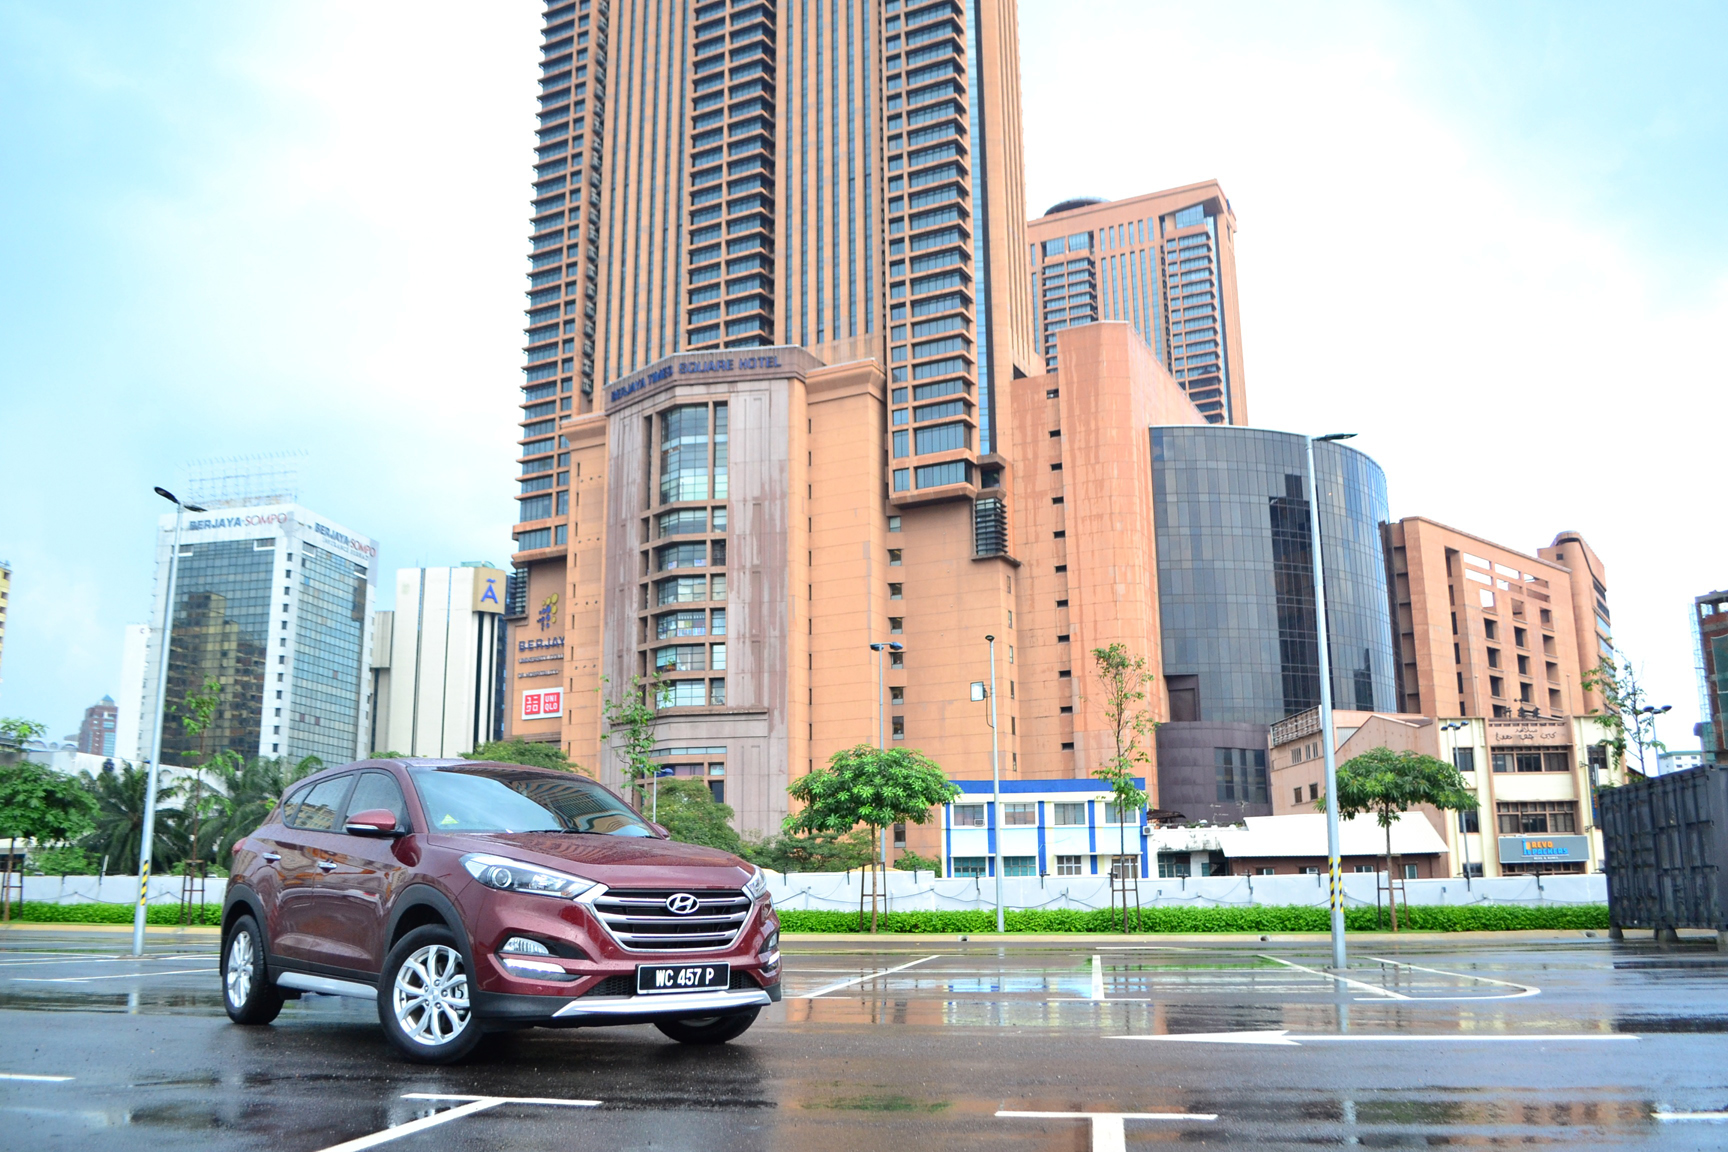 The Hyundai Tucson - An epitome of Korean innovation and 